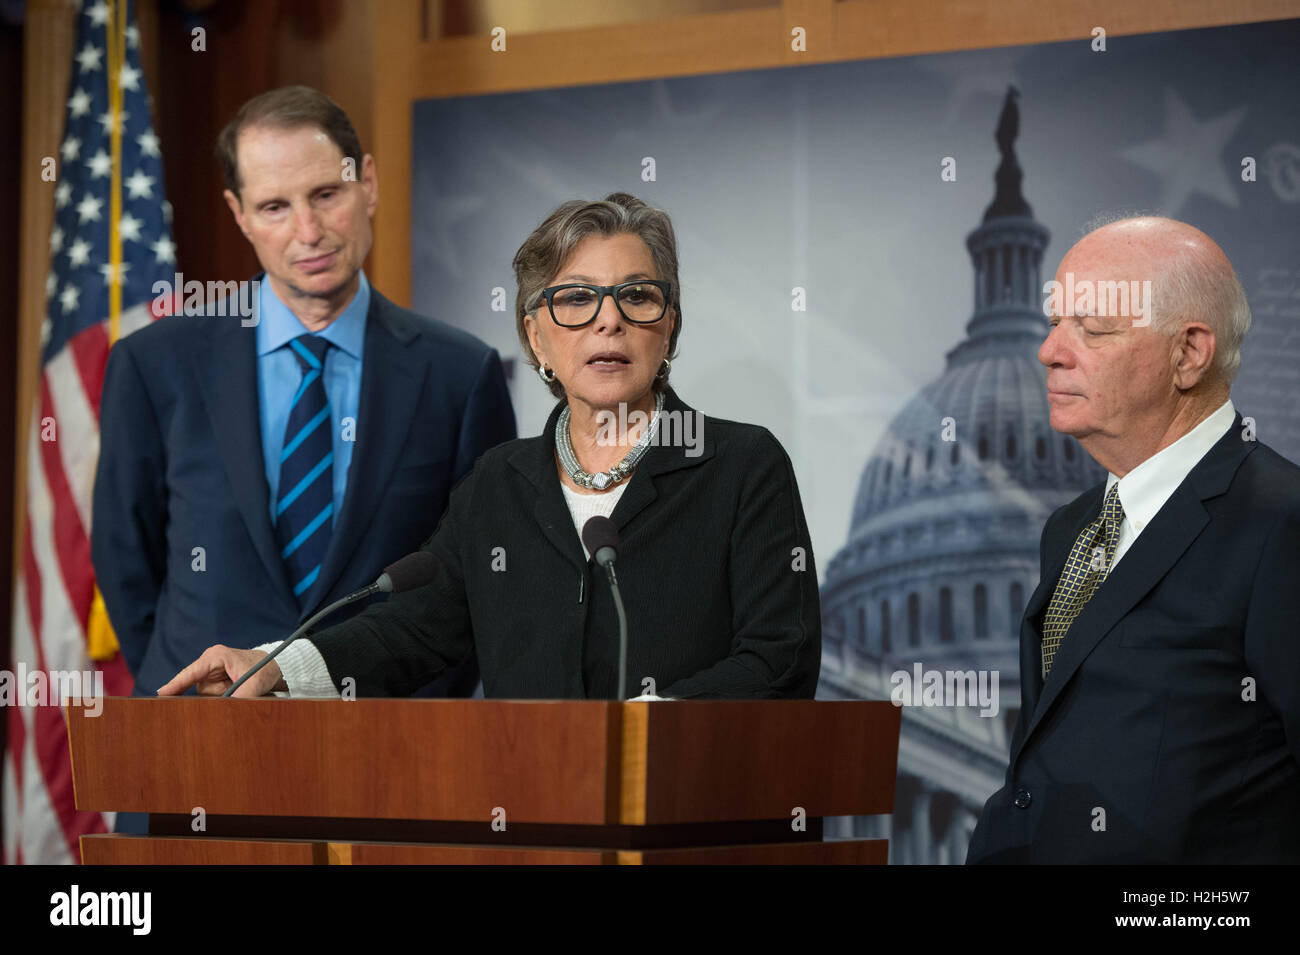 U.S. Democratic Party Senators (L-R) Ron Wyden from Oregon, Barbara Boxer from California, and Ben Cardin from Maryland, take turns discussing the Presidential Tax Transparency Act at a press conference in the Senate Radio/TV Gallery of the U.S. Capitol Building September 15, 2016 in Washington, D.C. Stock Photo